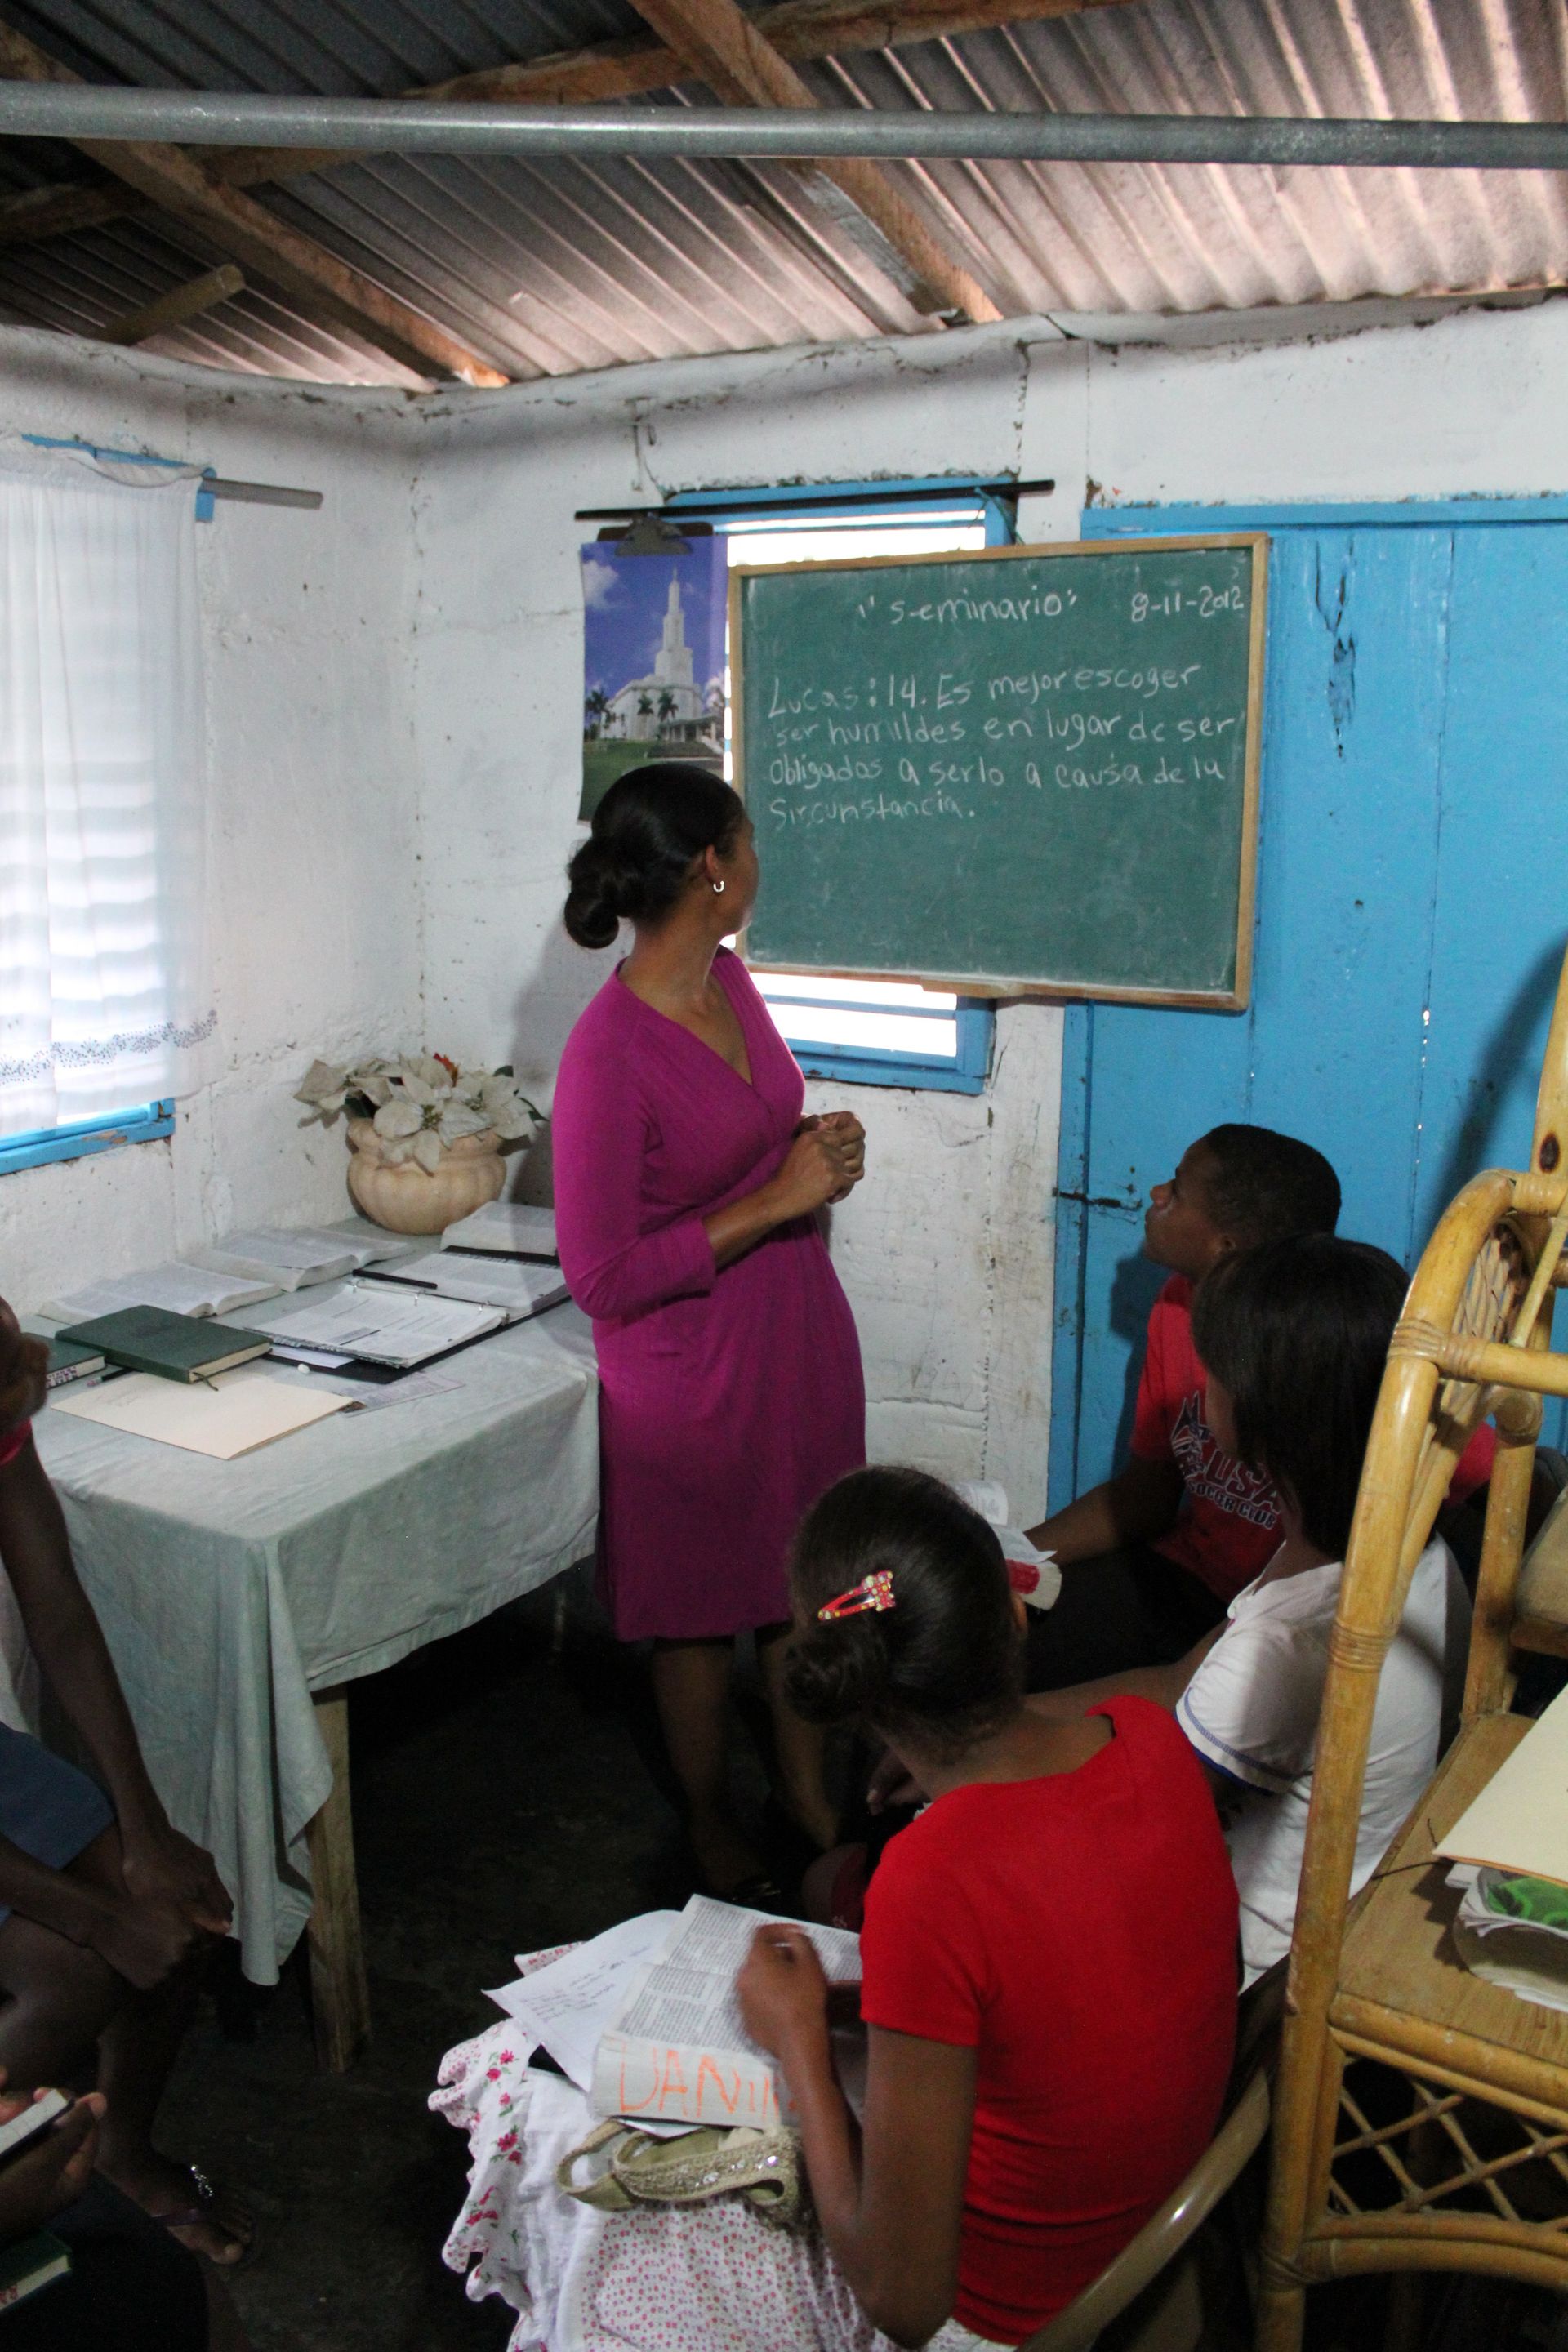 A woman in the Dominican Republic teaches seminary in a small room to a few young men and women.